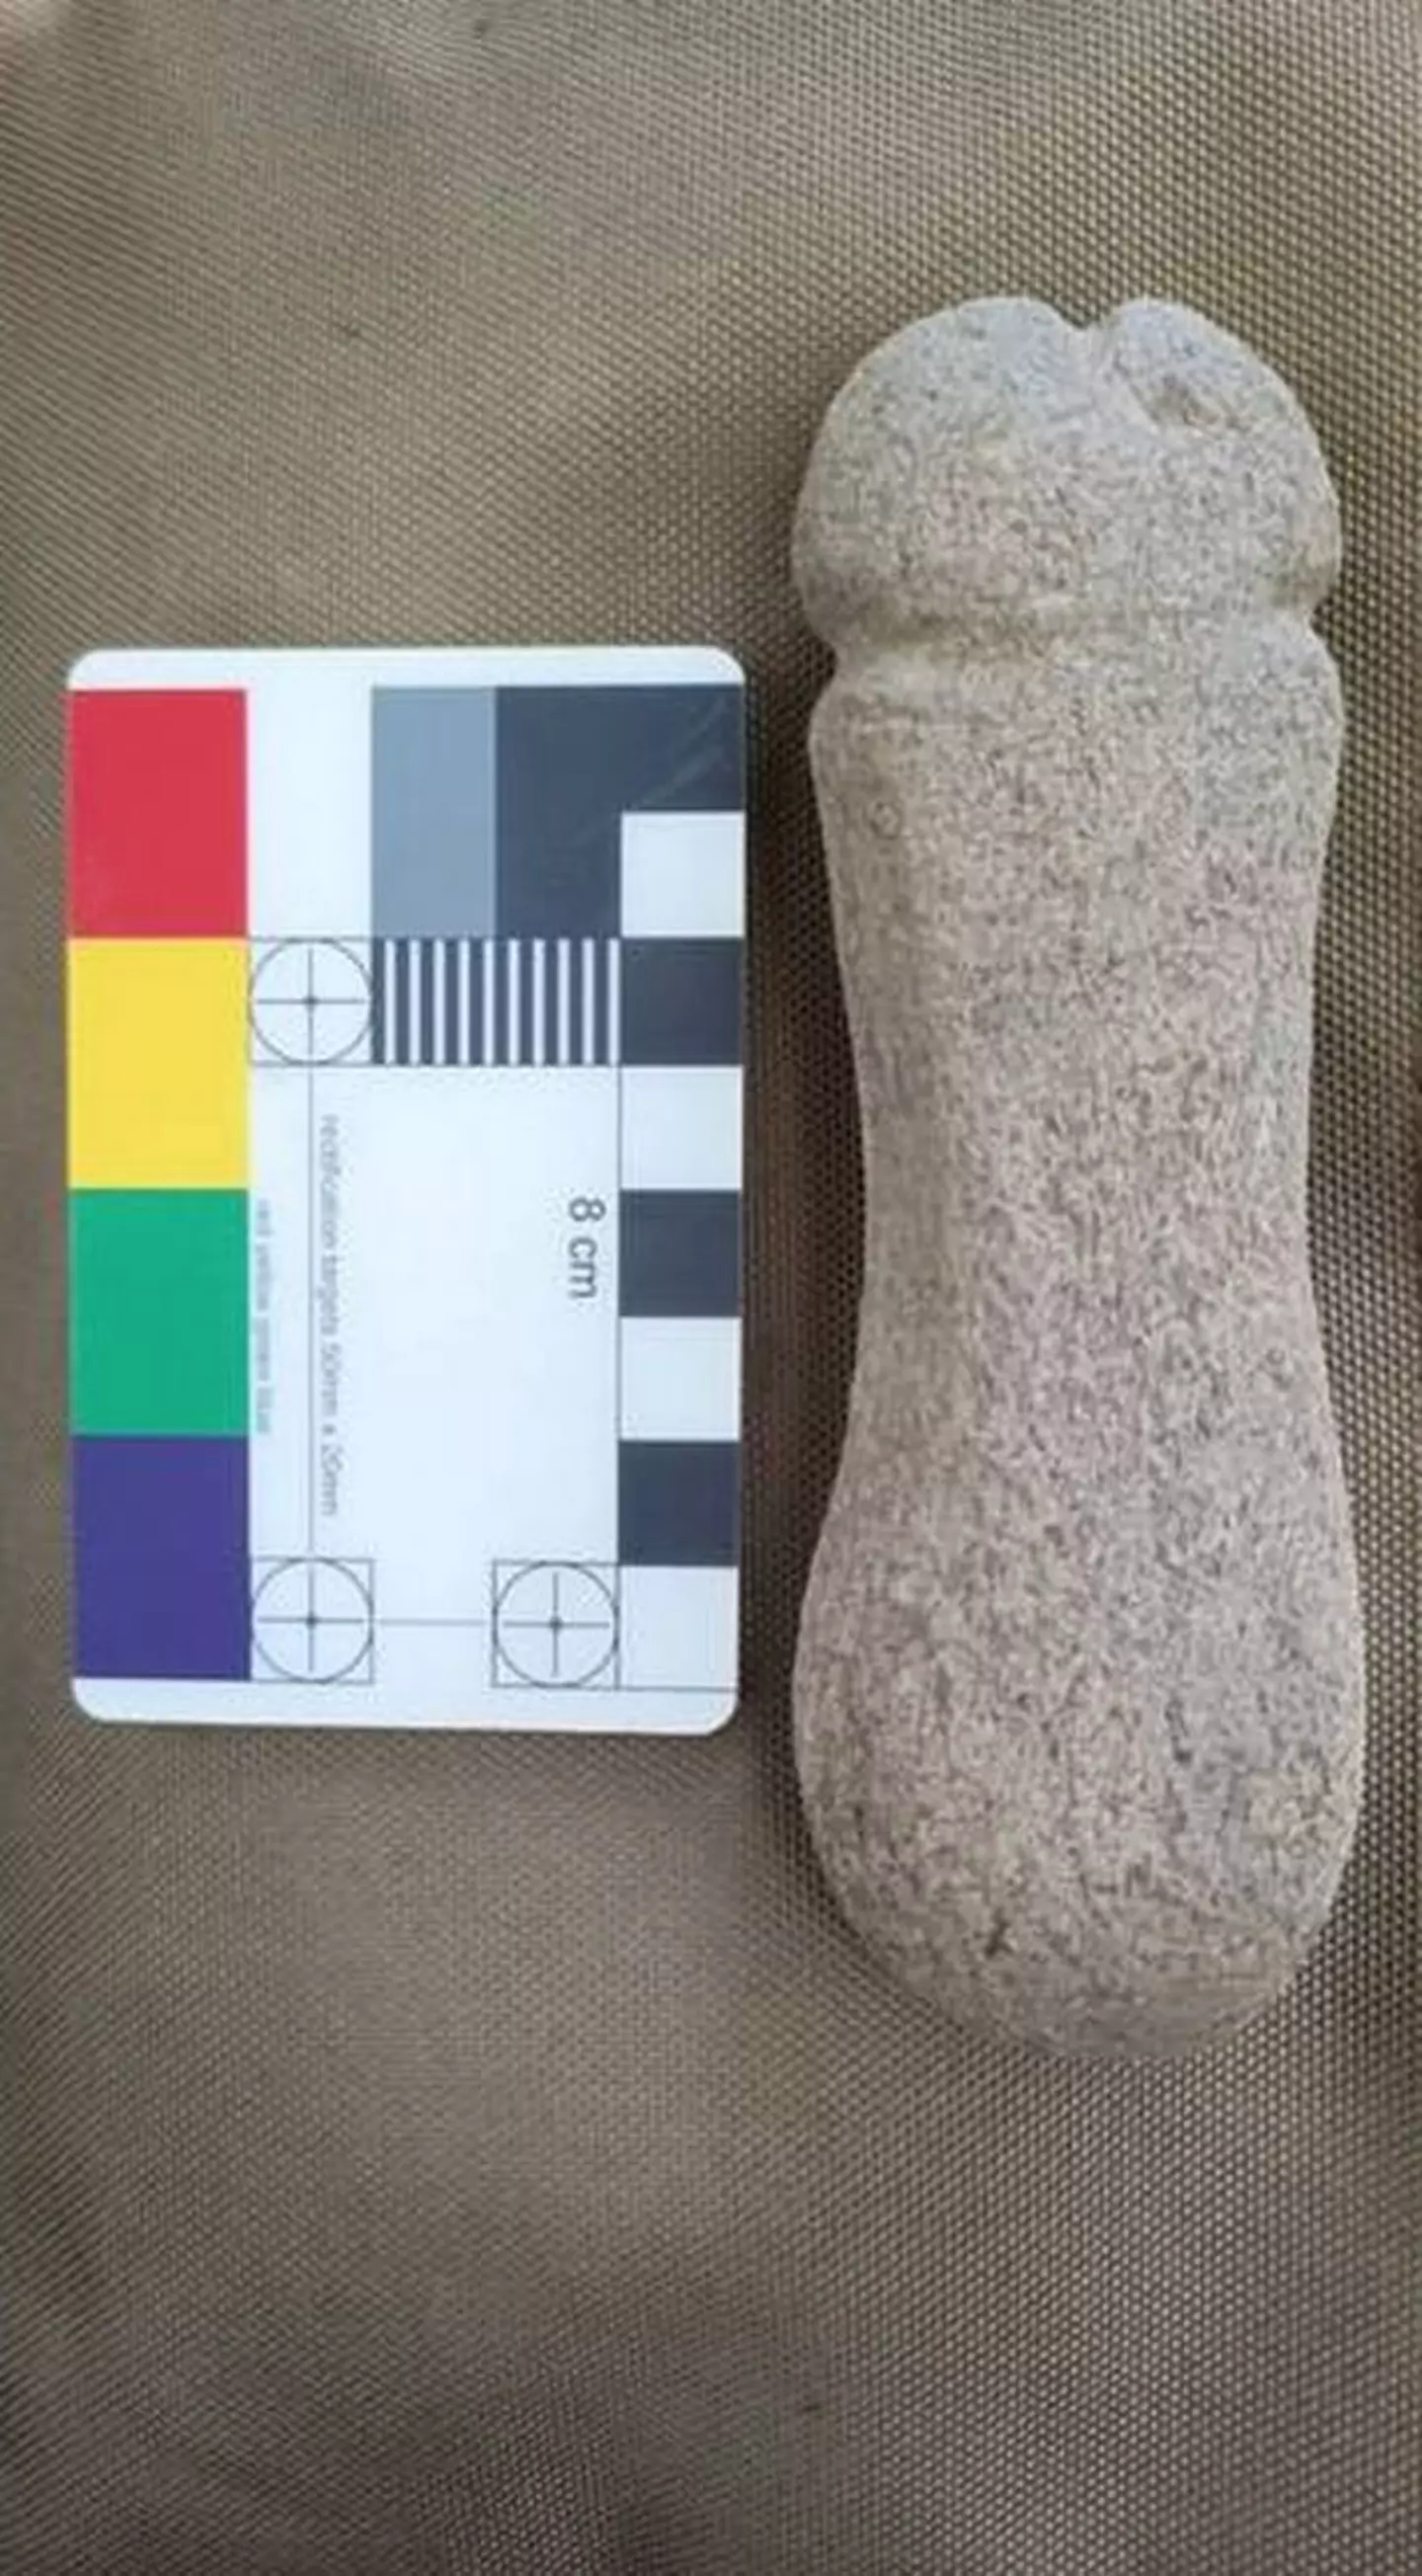 The stone object was used for something violent.